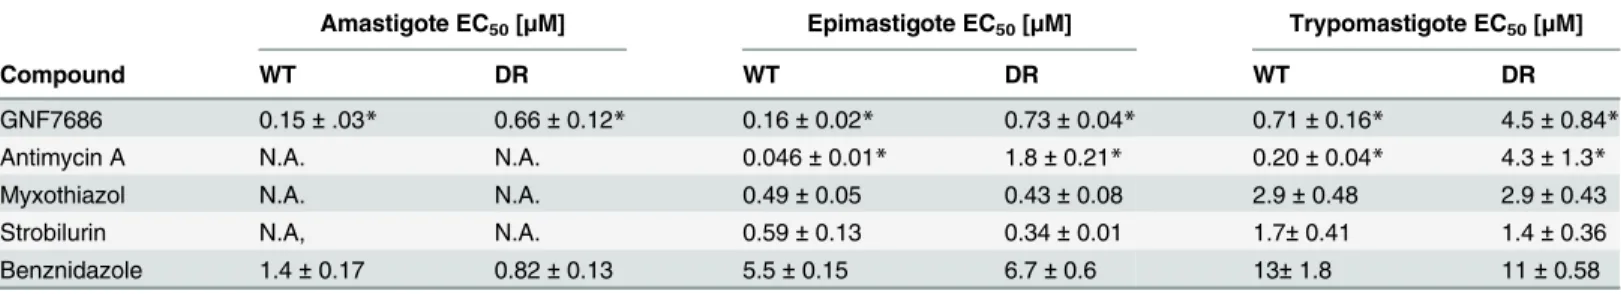 Table 1. Potency of GNF7686 and prototypic cytochrome b Inhibitors on wild-type (WT) and GNF7686-resistant (DR) T